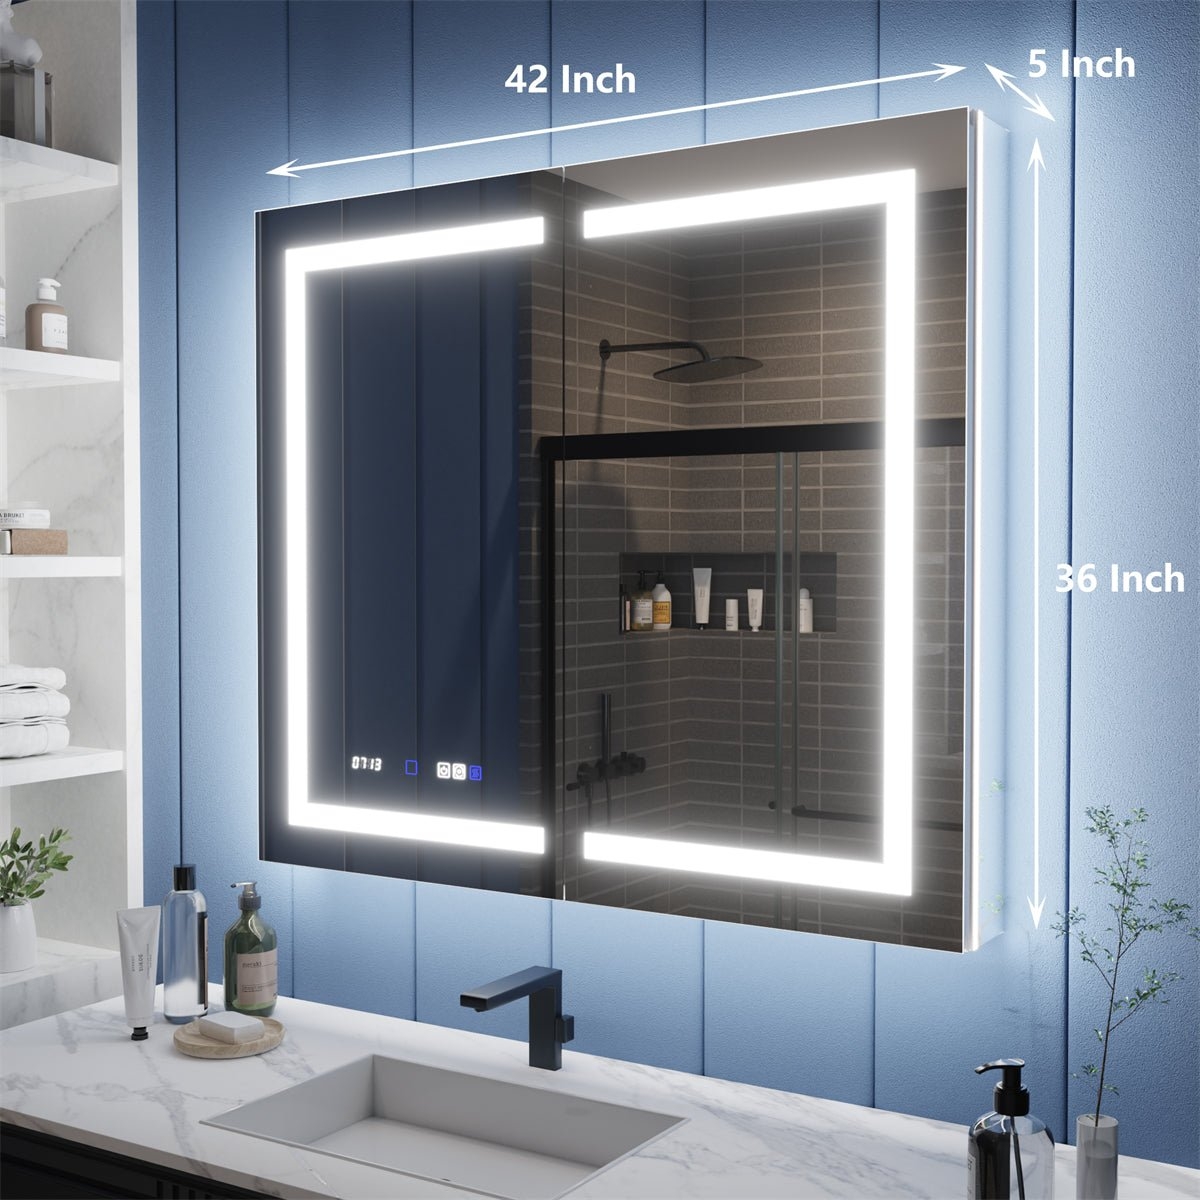 allsumhome Illusion-B 42" x 36" LED Lighted Inset Mirrored Medicine Cabinet with Magnifiers Front and Back Light